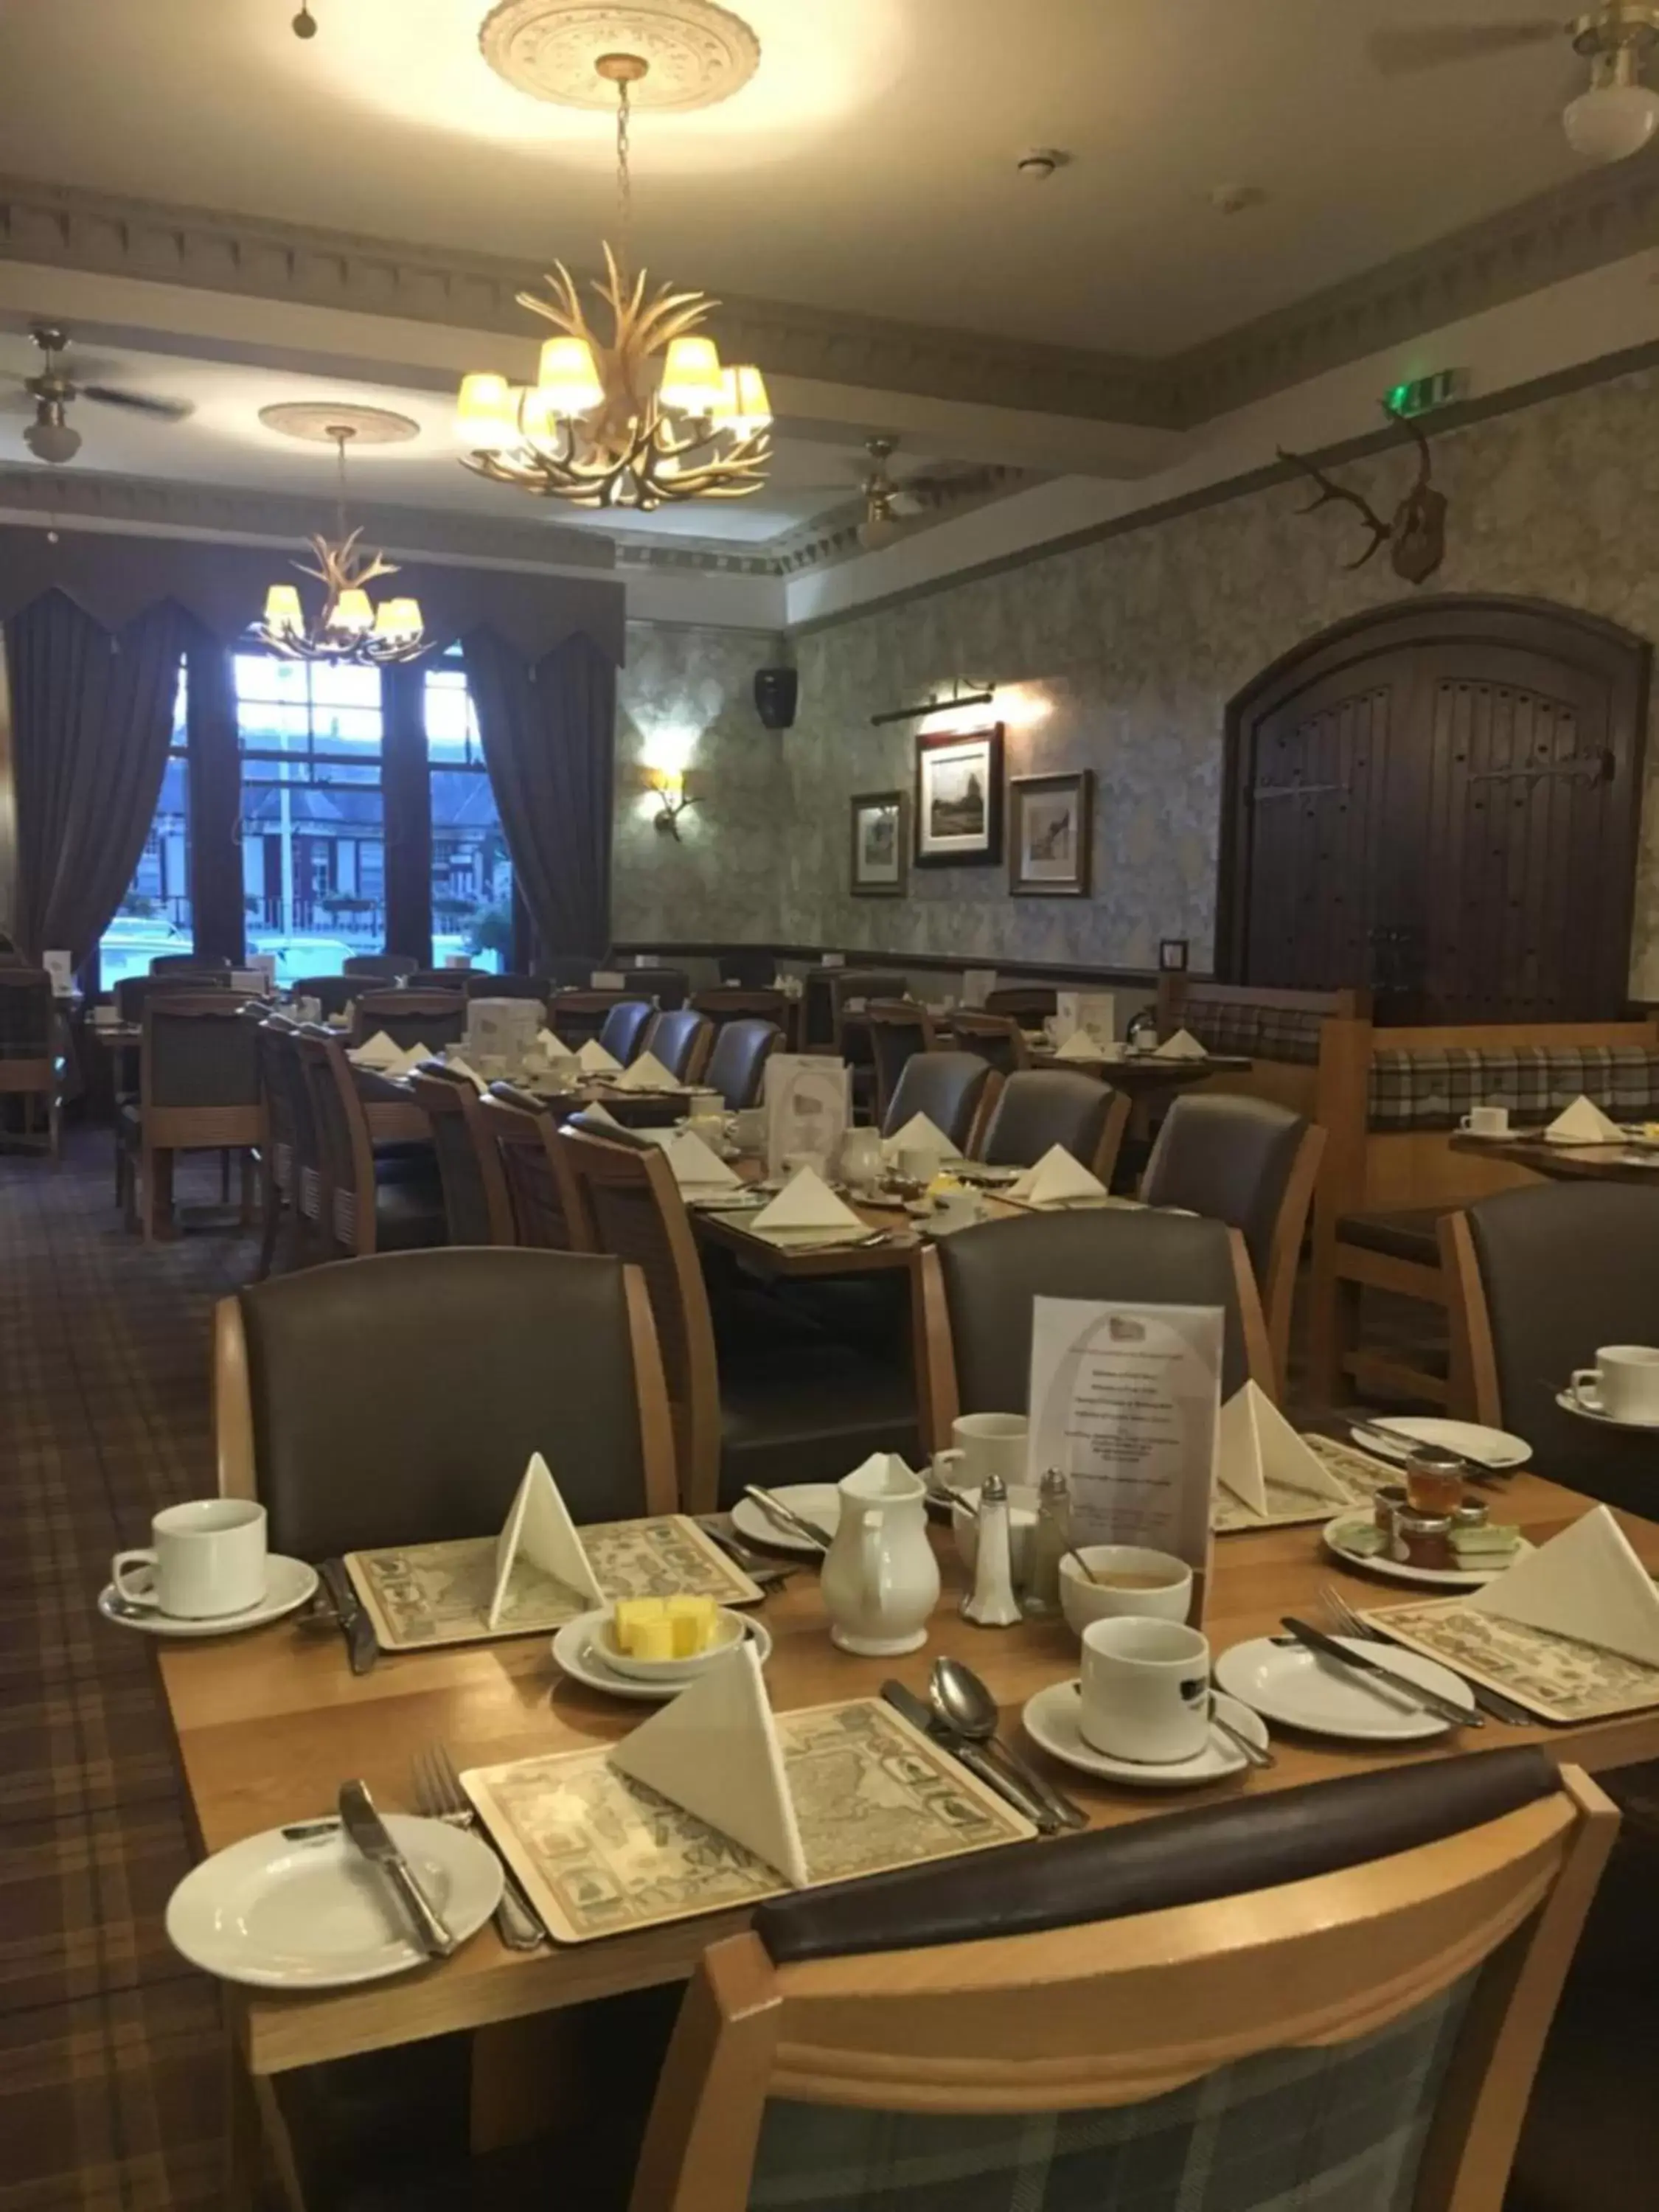 Dining area, Restaurant/Places to Eat in Cairngorm Hotel